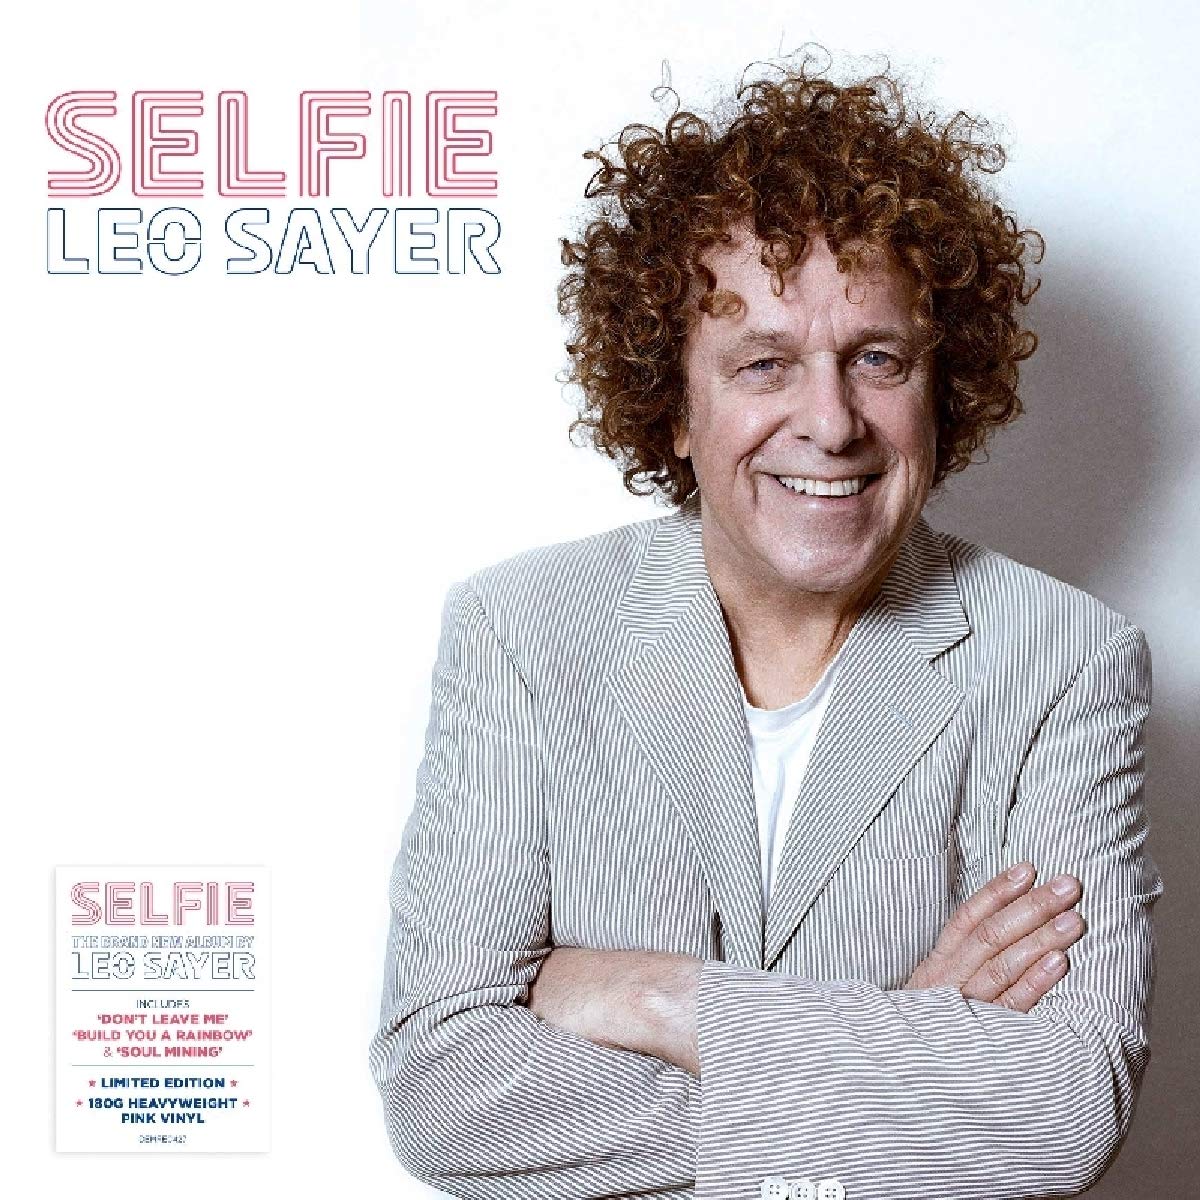 CD: Leo Sayer - Selfie review - undercooked comeback